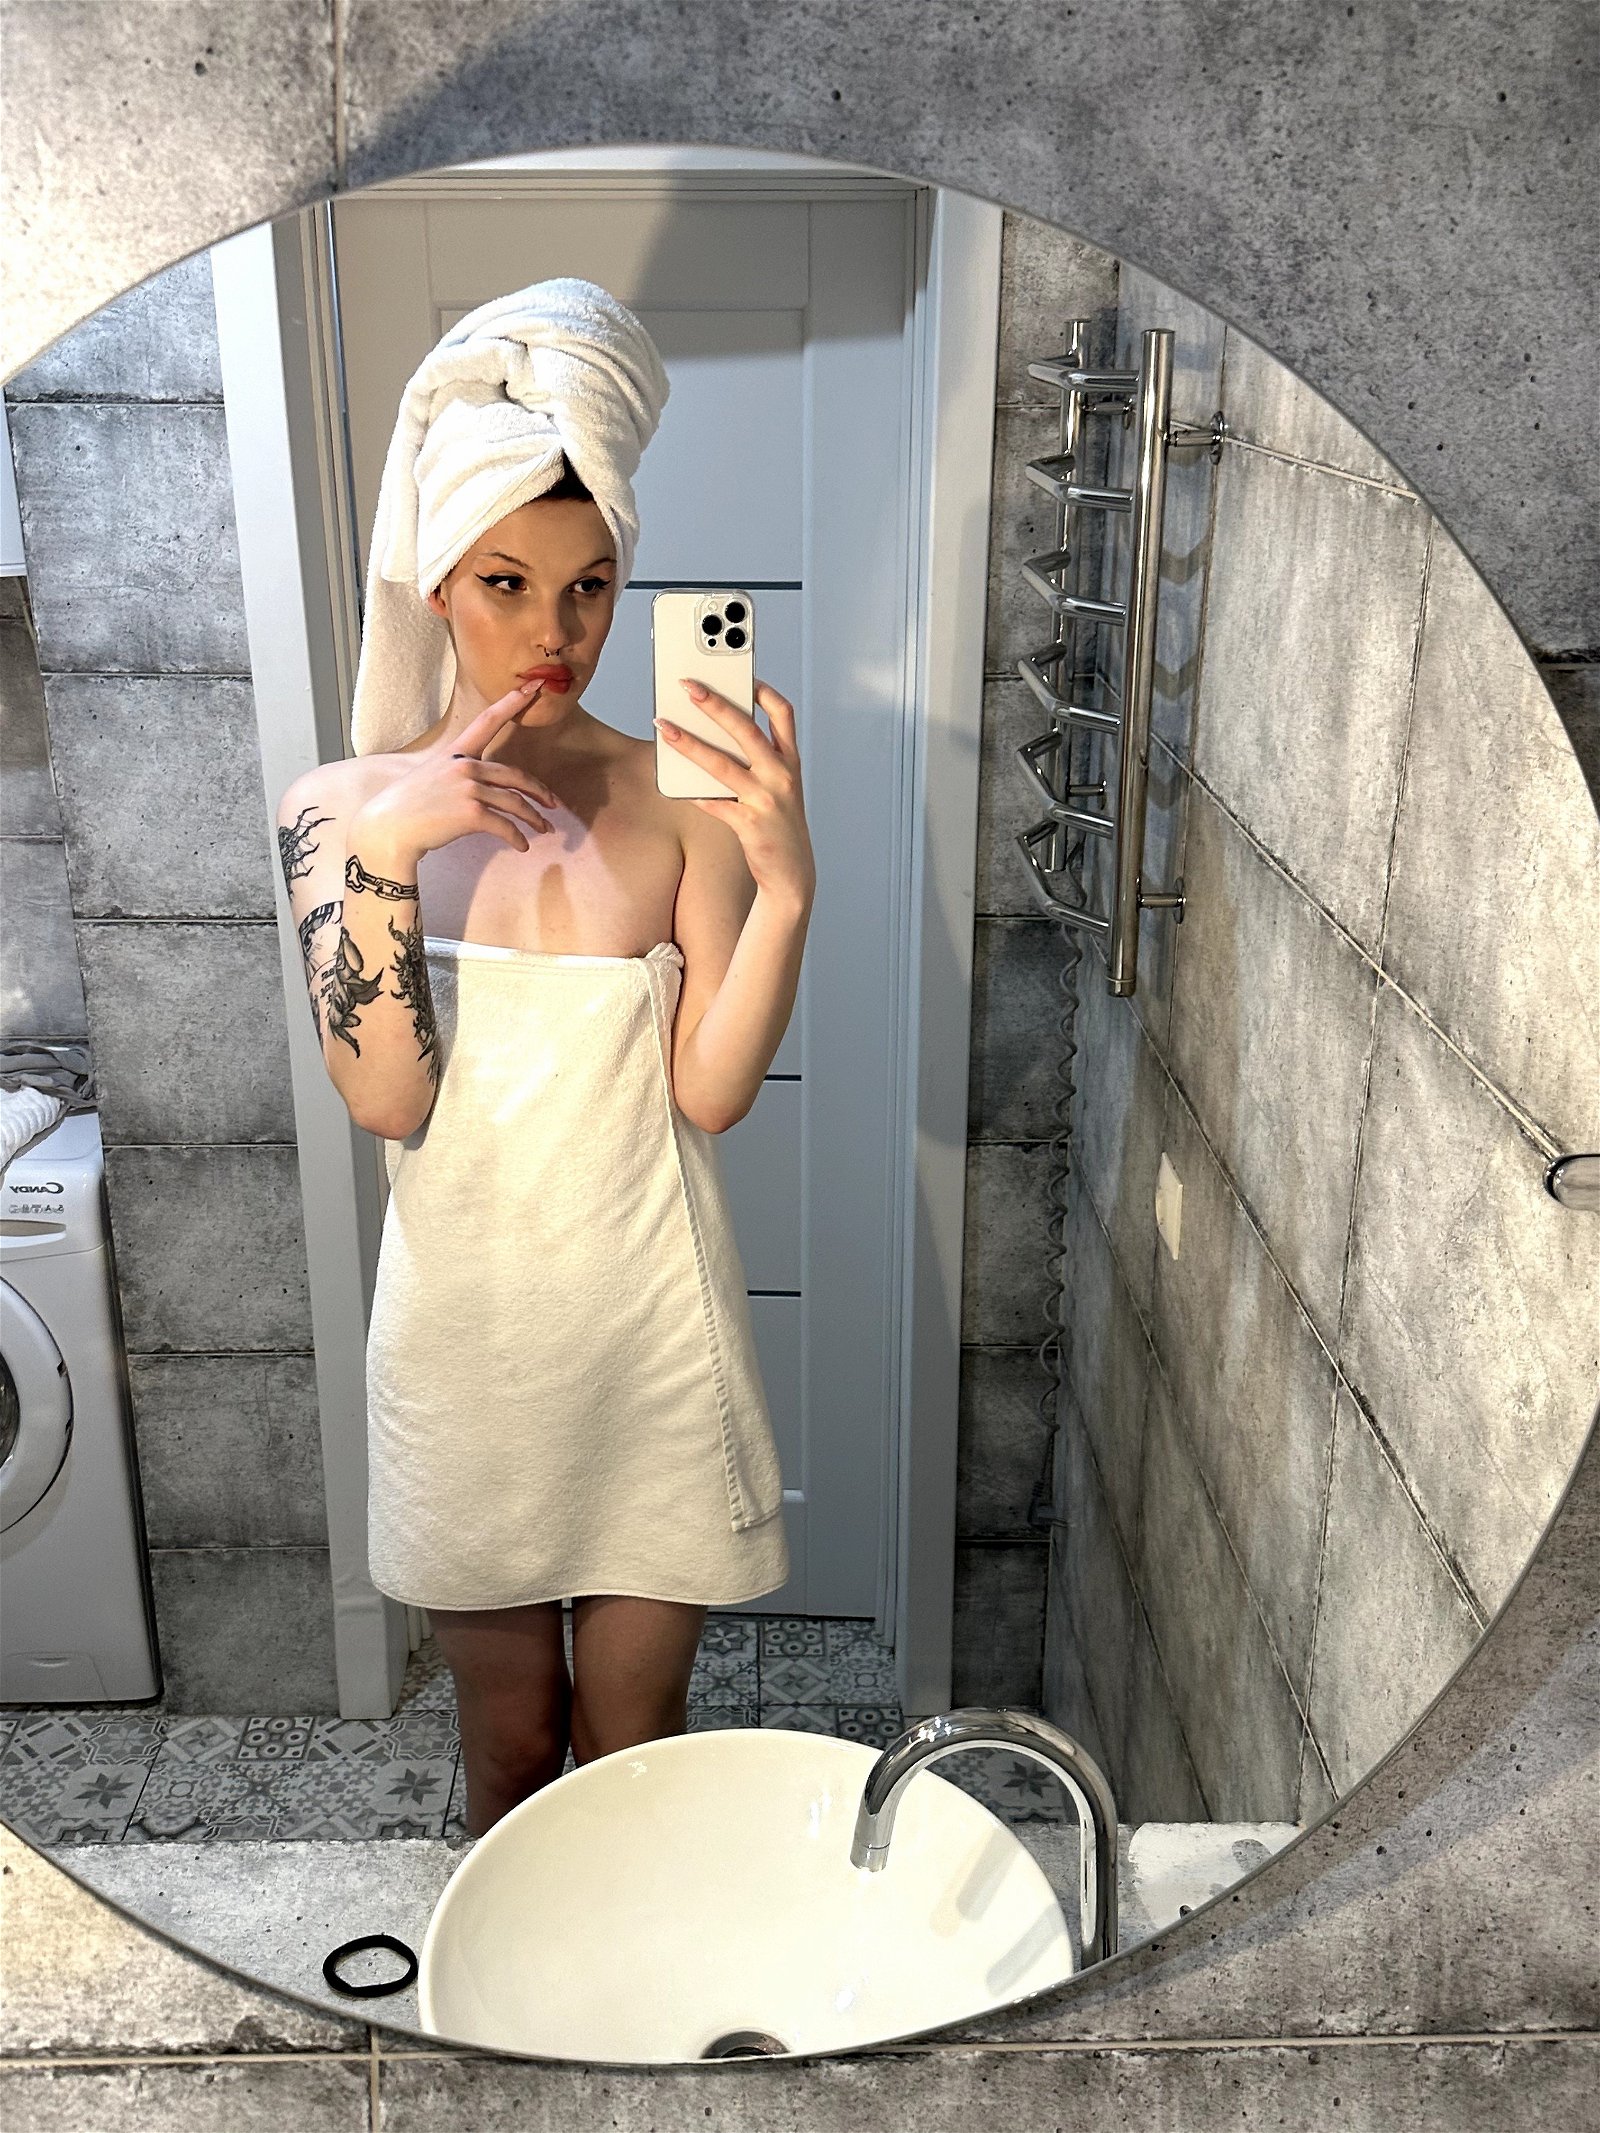 Photo by Milana.ts with the username @Milana11, who is a star user,  August 14, 2023 at 3:14 PM. The post is about the topic Sexy Shemale and the text says 'Want to see what's under the towel? My OF - https://onlyfans.com/action/trial/cgp2xzv0ntzrfkdh4qzcukjyz1pimrdi'